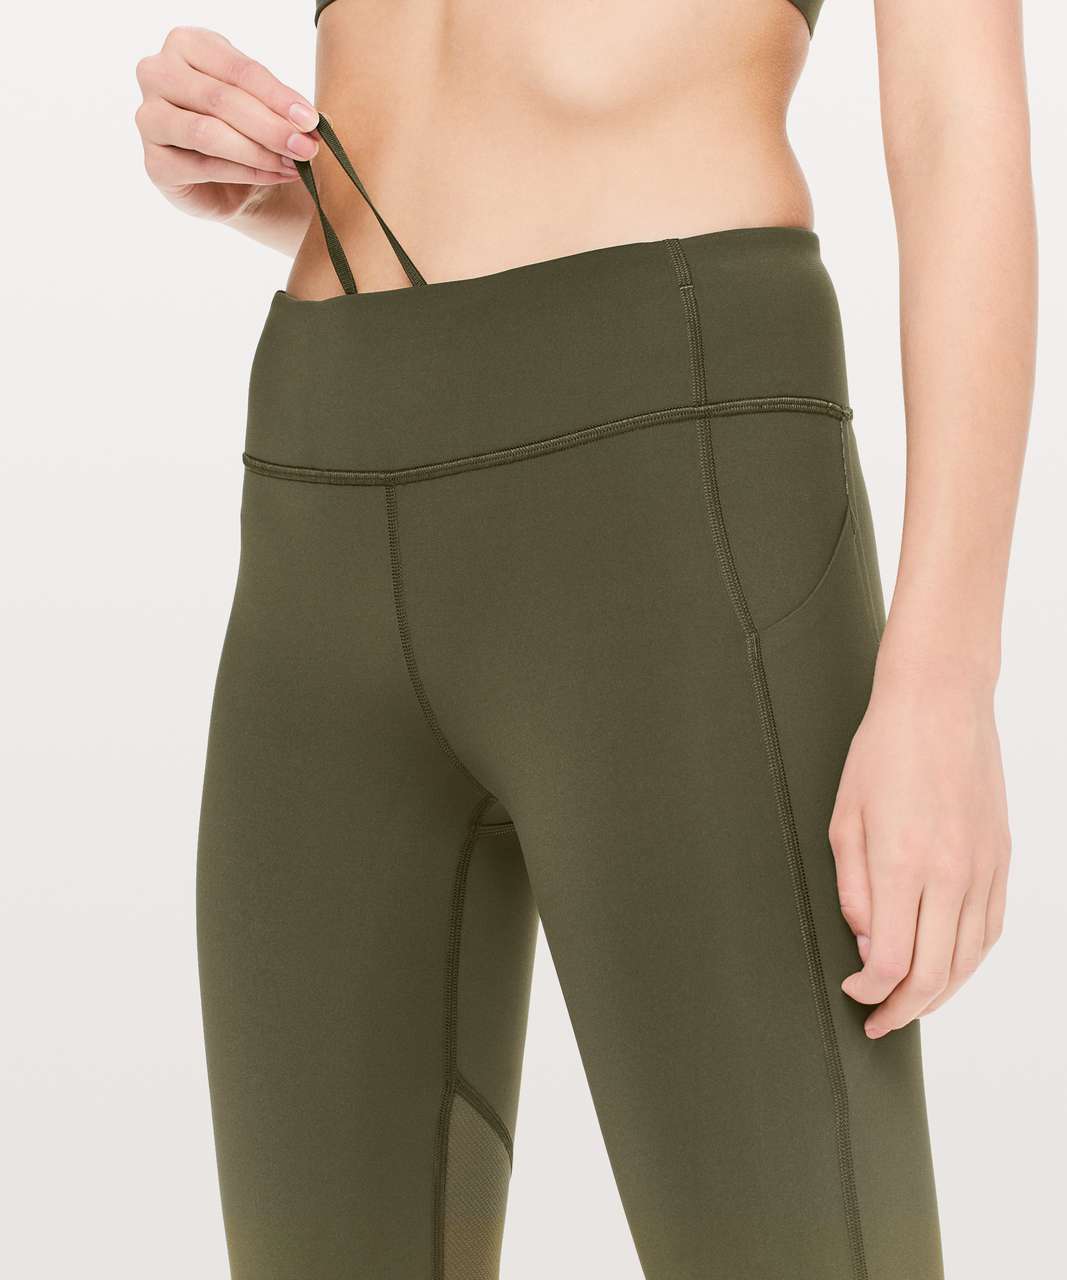 Lululemon Pace Rival Crop, Size 6, Women's Fashion, Activewear on Carousell